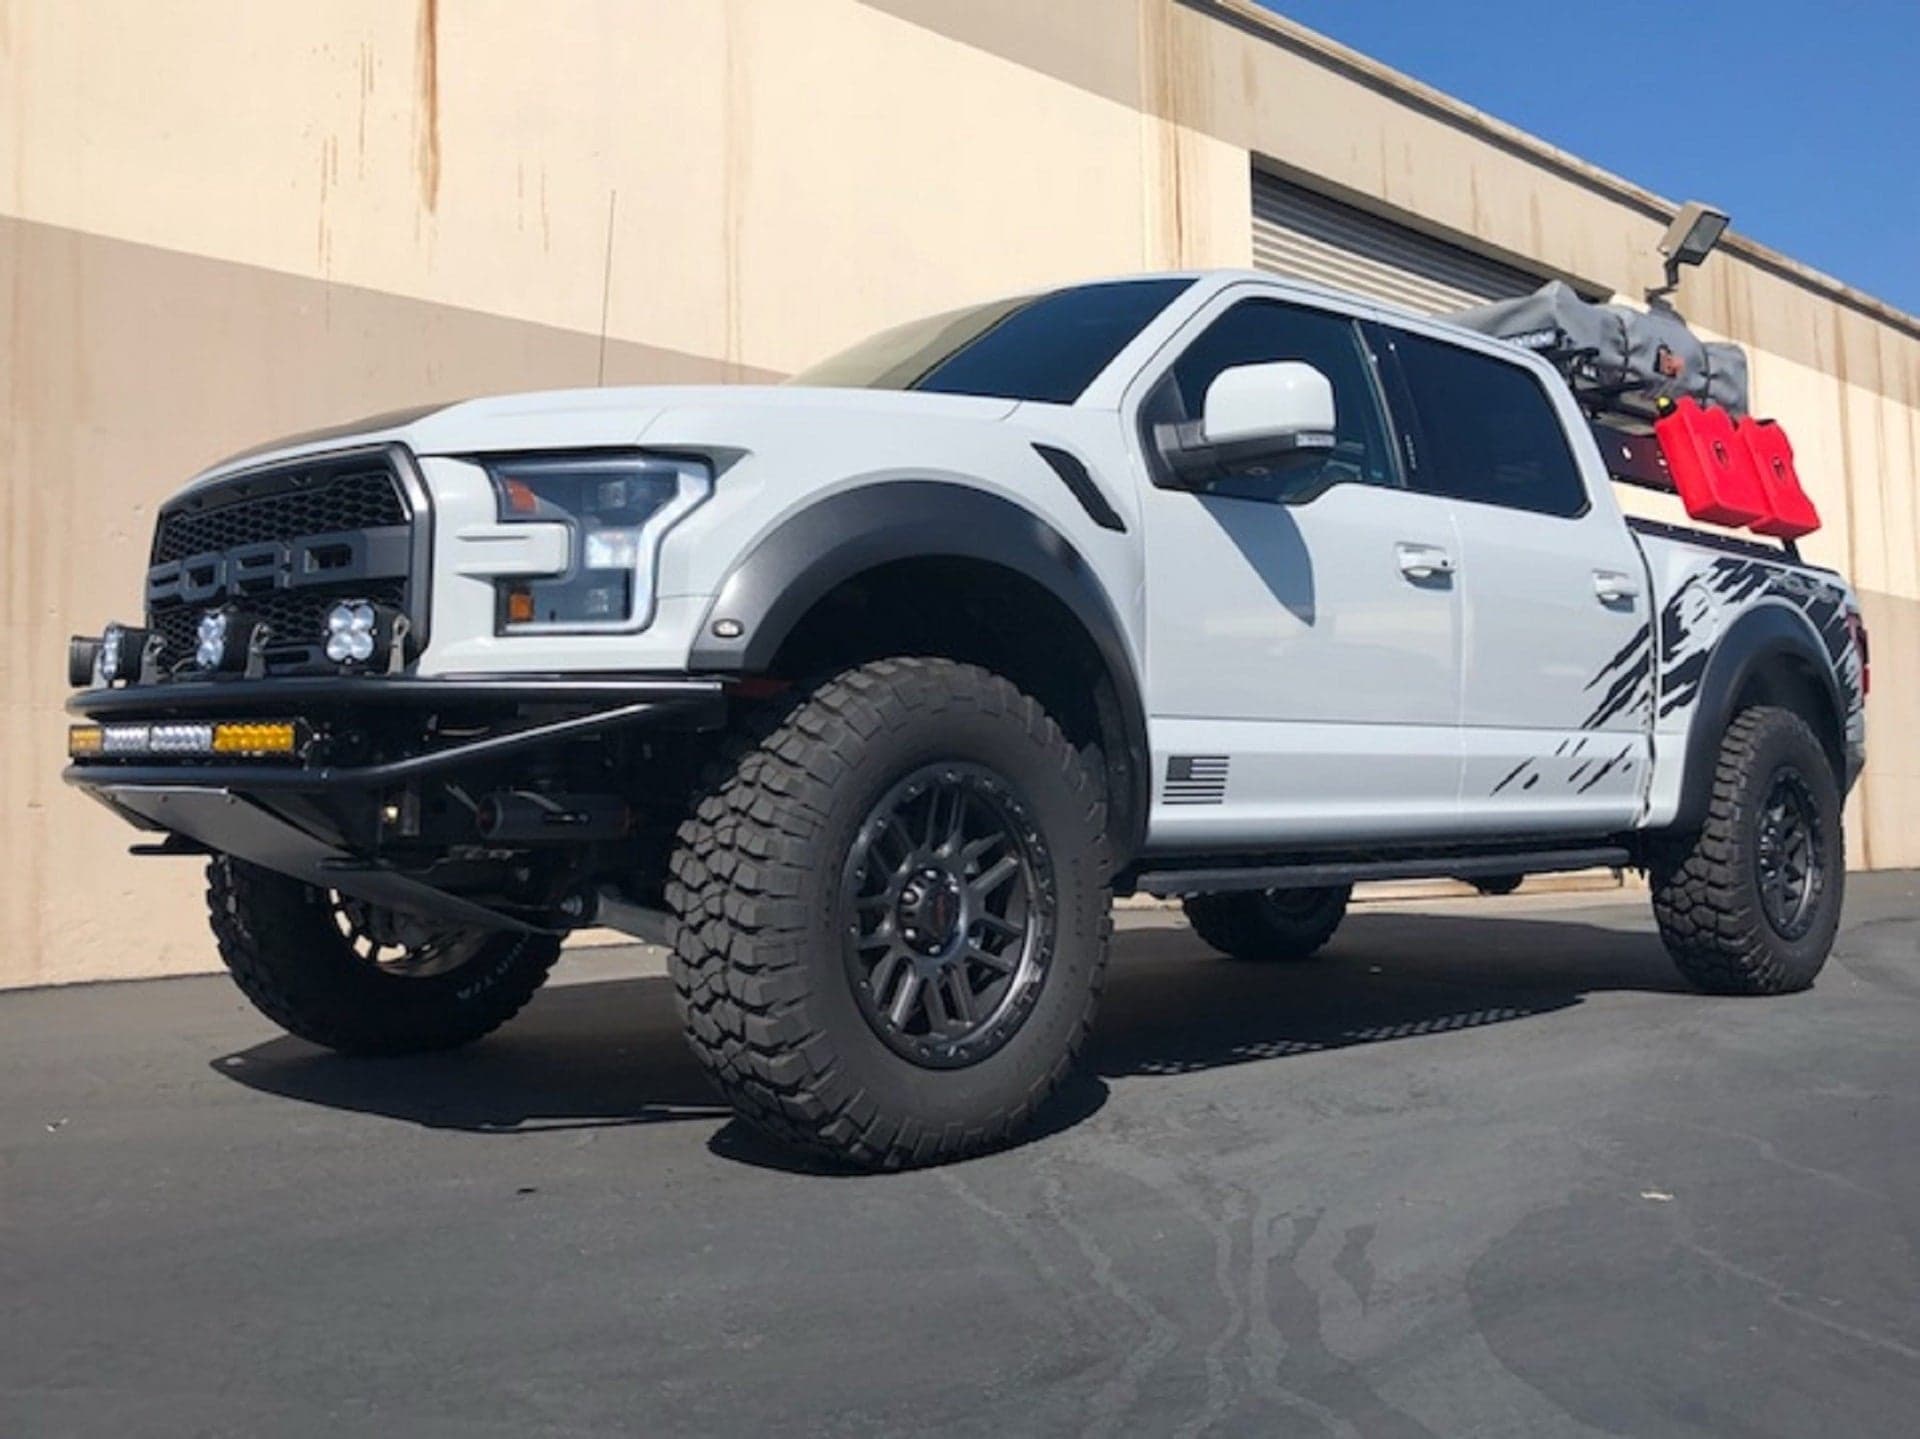 Roush Teams Up RPG Off-Road to Make Ultimate Ford Raptor